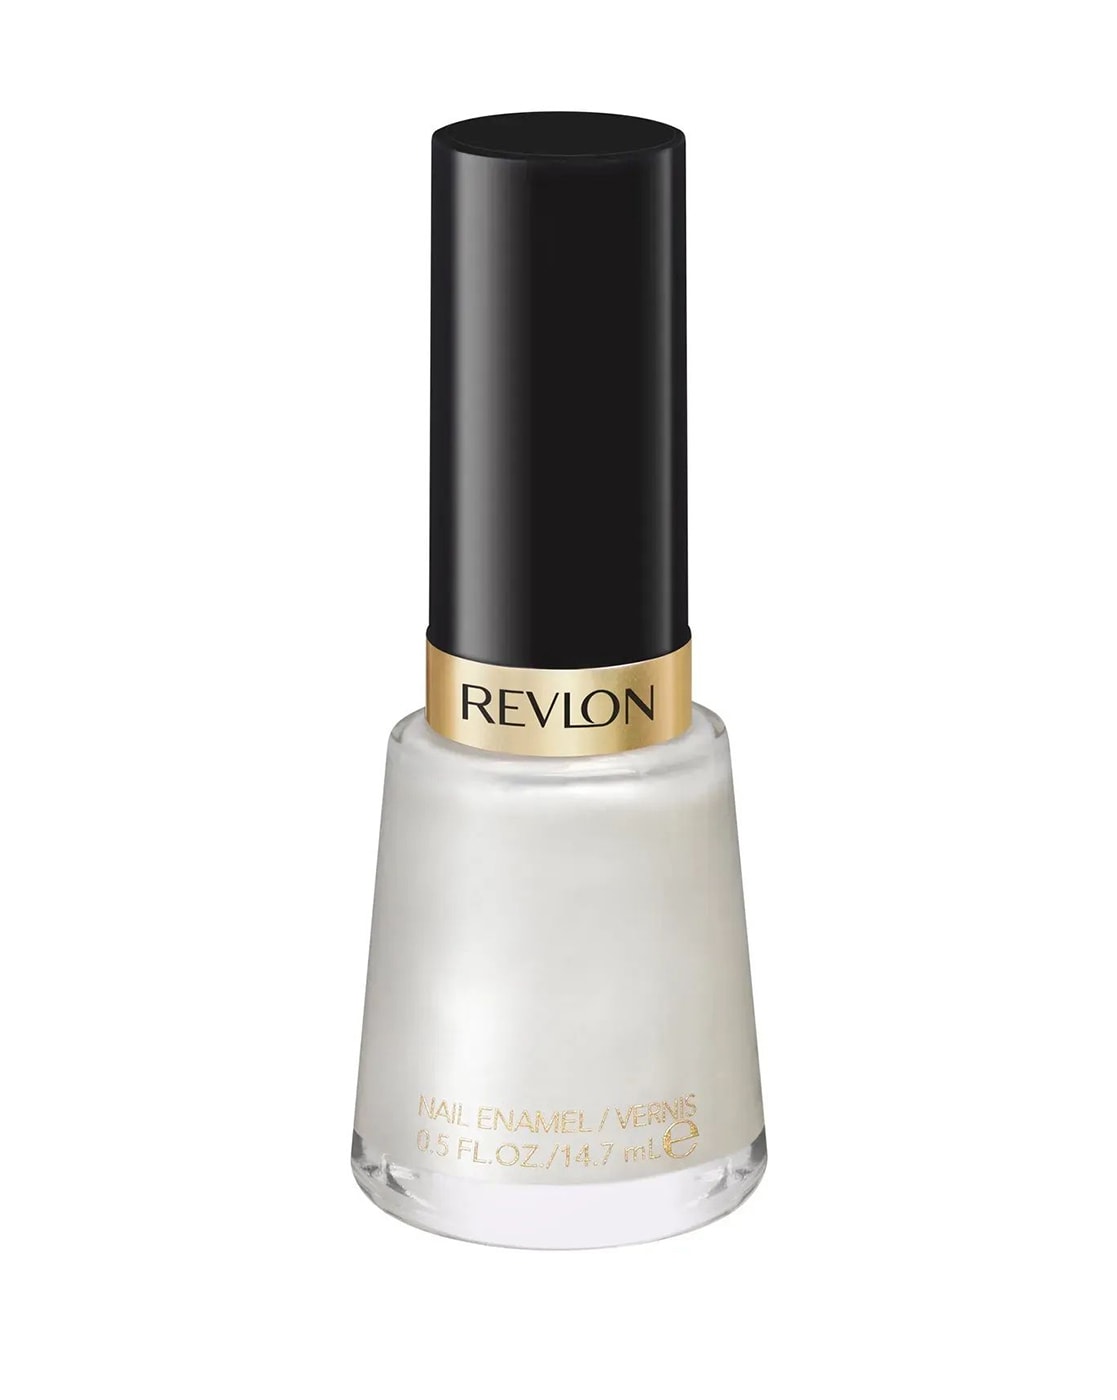 Buy Revlon Nail Enamel, Chip Resistant Nail Polish, Glossy Shine Finish, in  Pink, 723 Electric, 0.5 oz Online at Low Prices in India - Amazon.in